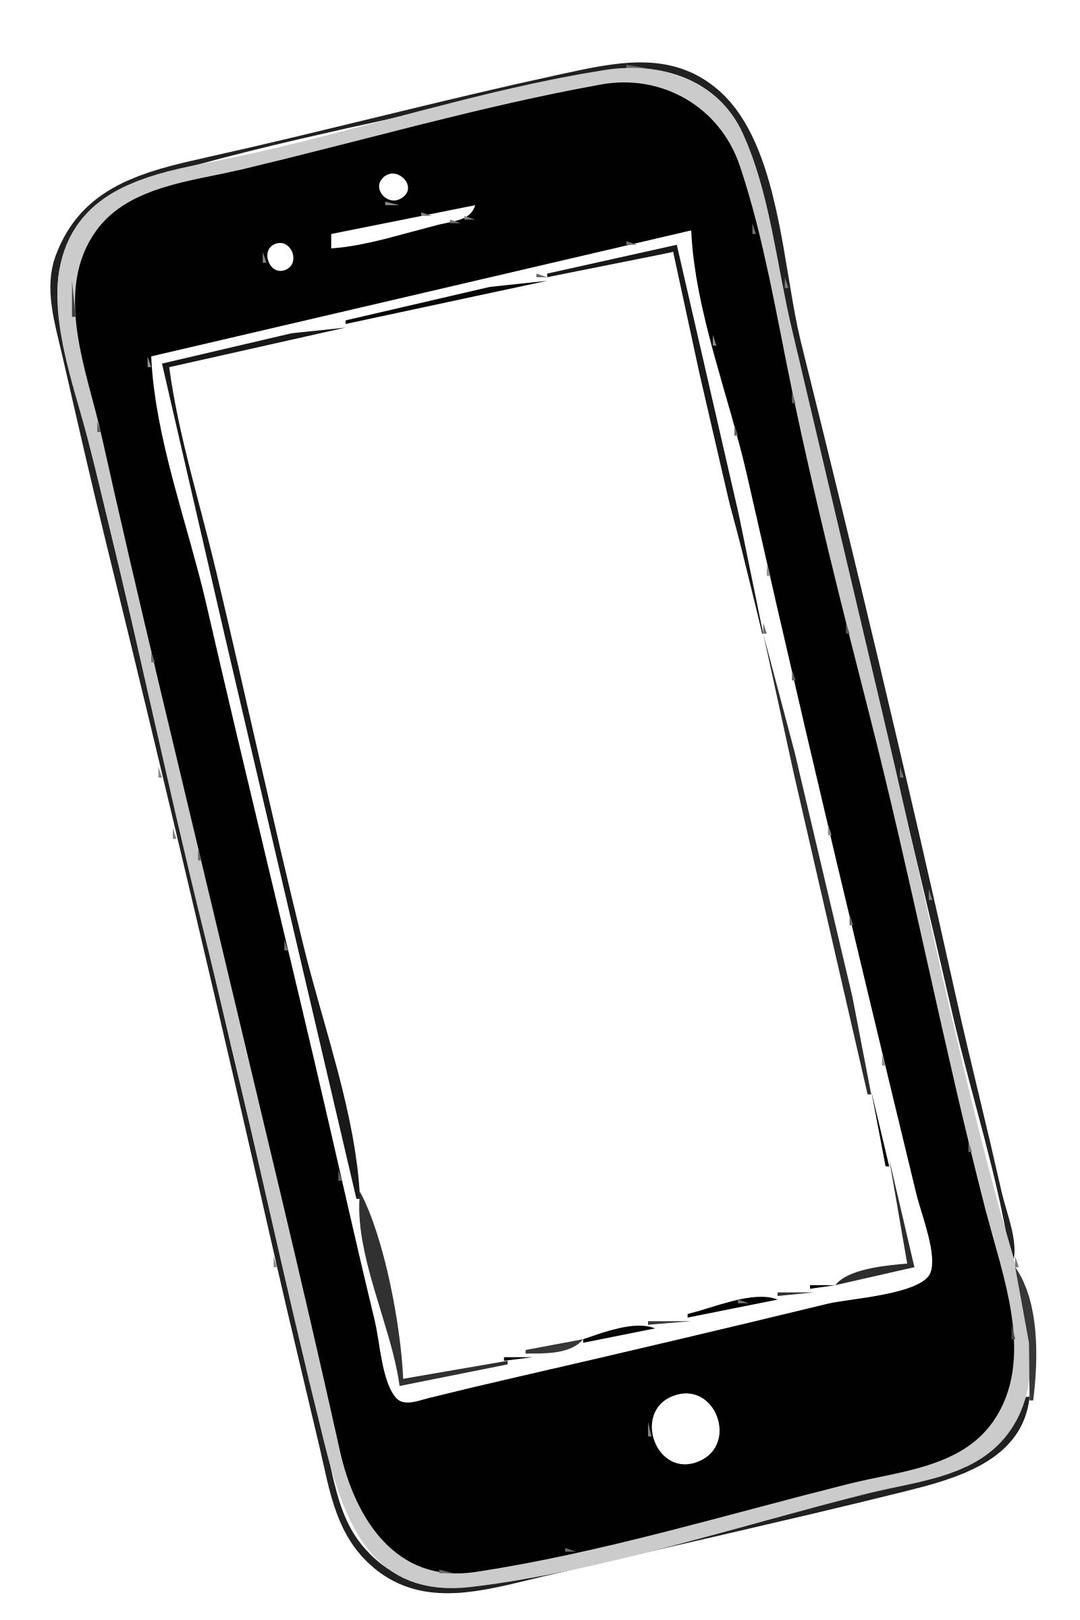 sending I-Phone to open clipart.org png transparent